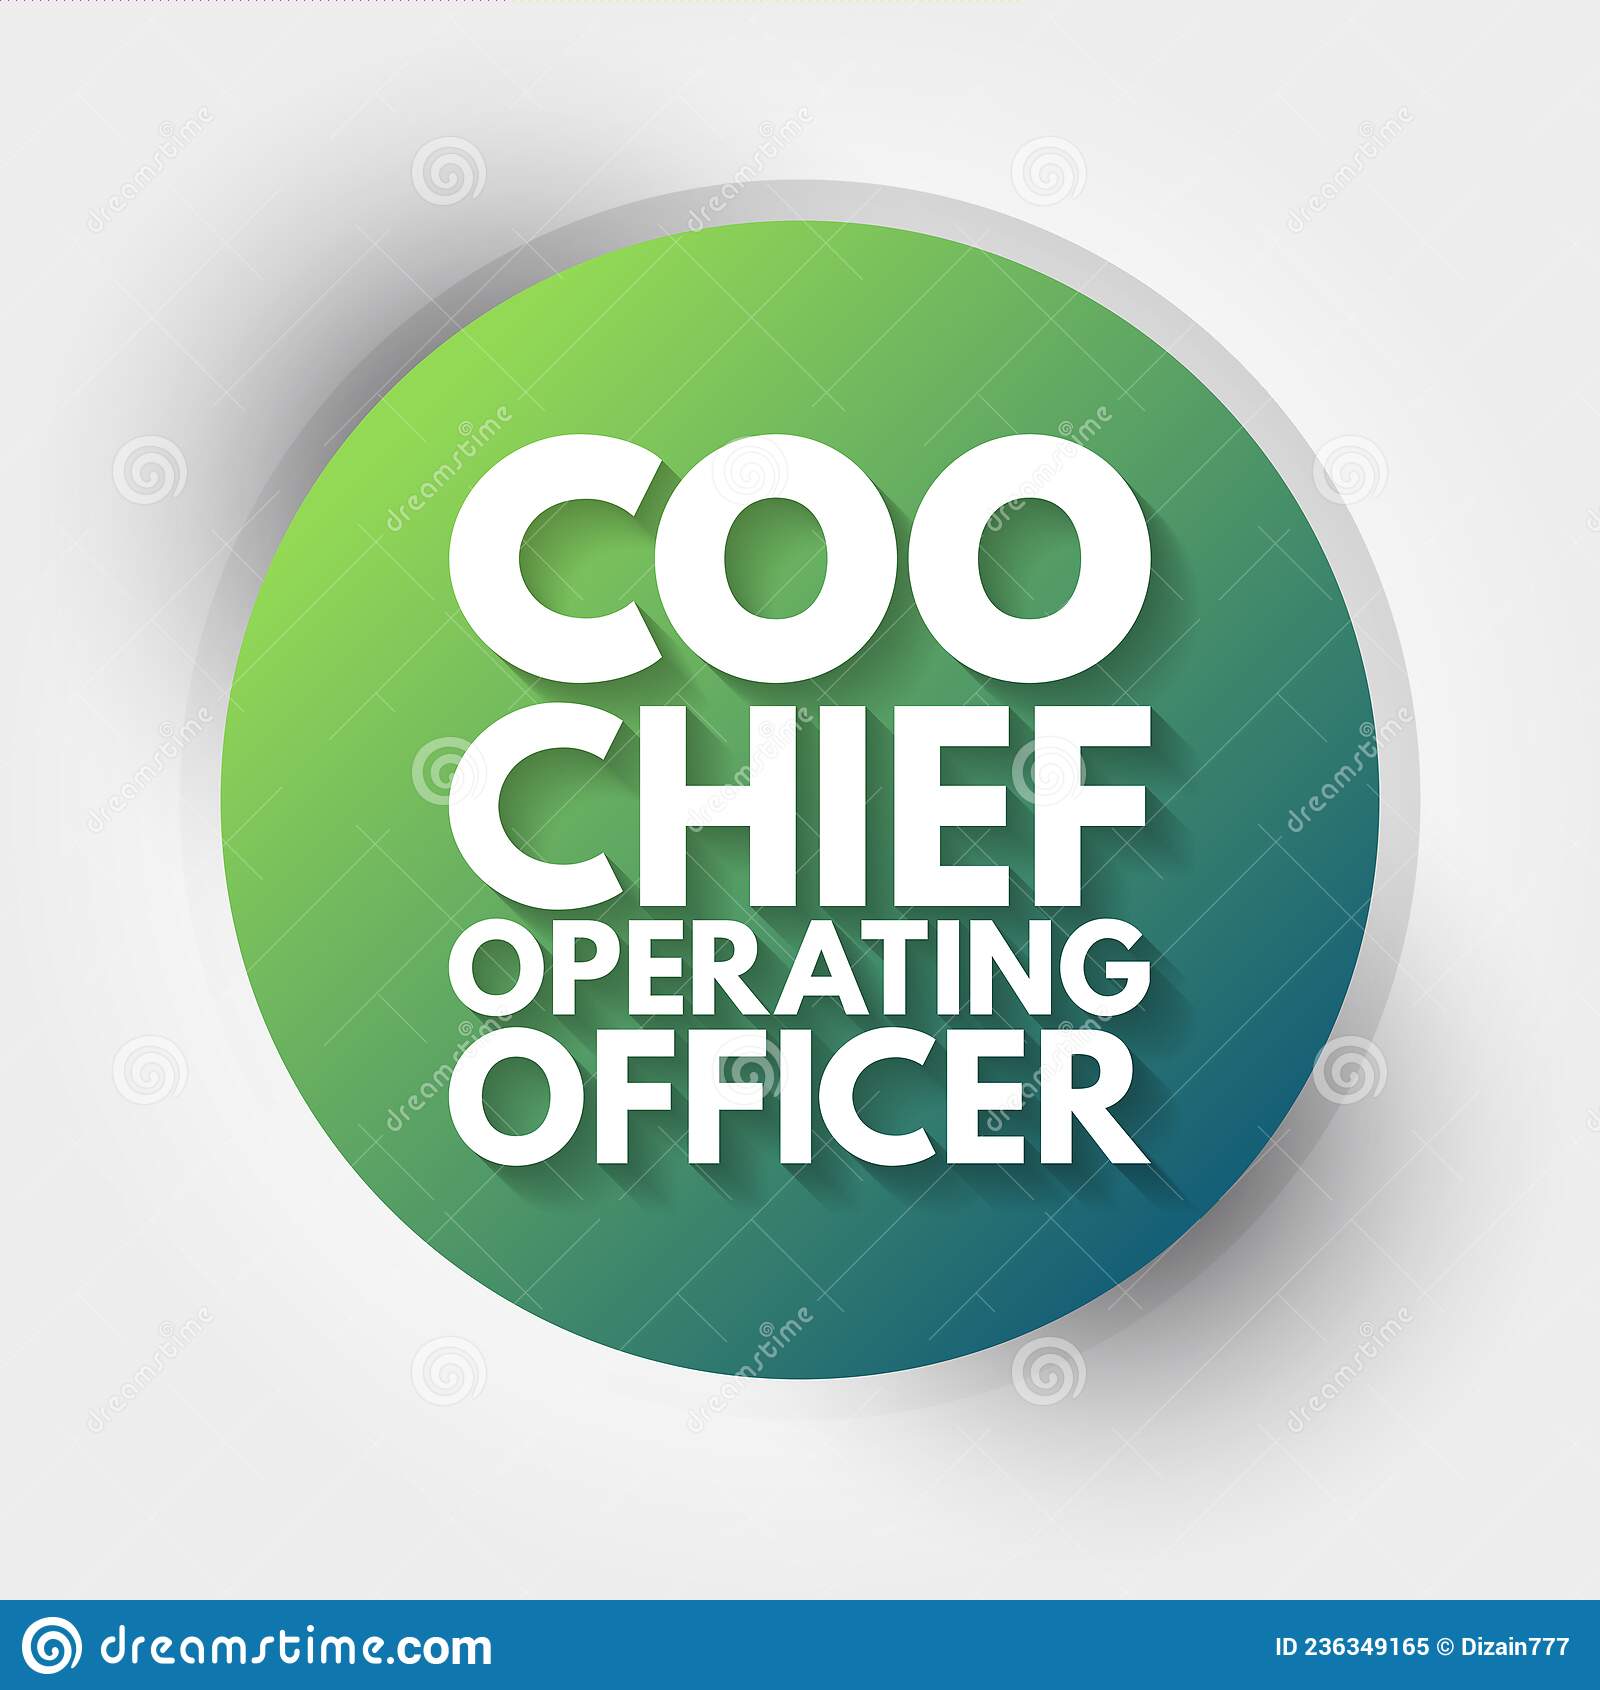 COO - CHIEF OPERATING OFFICER